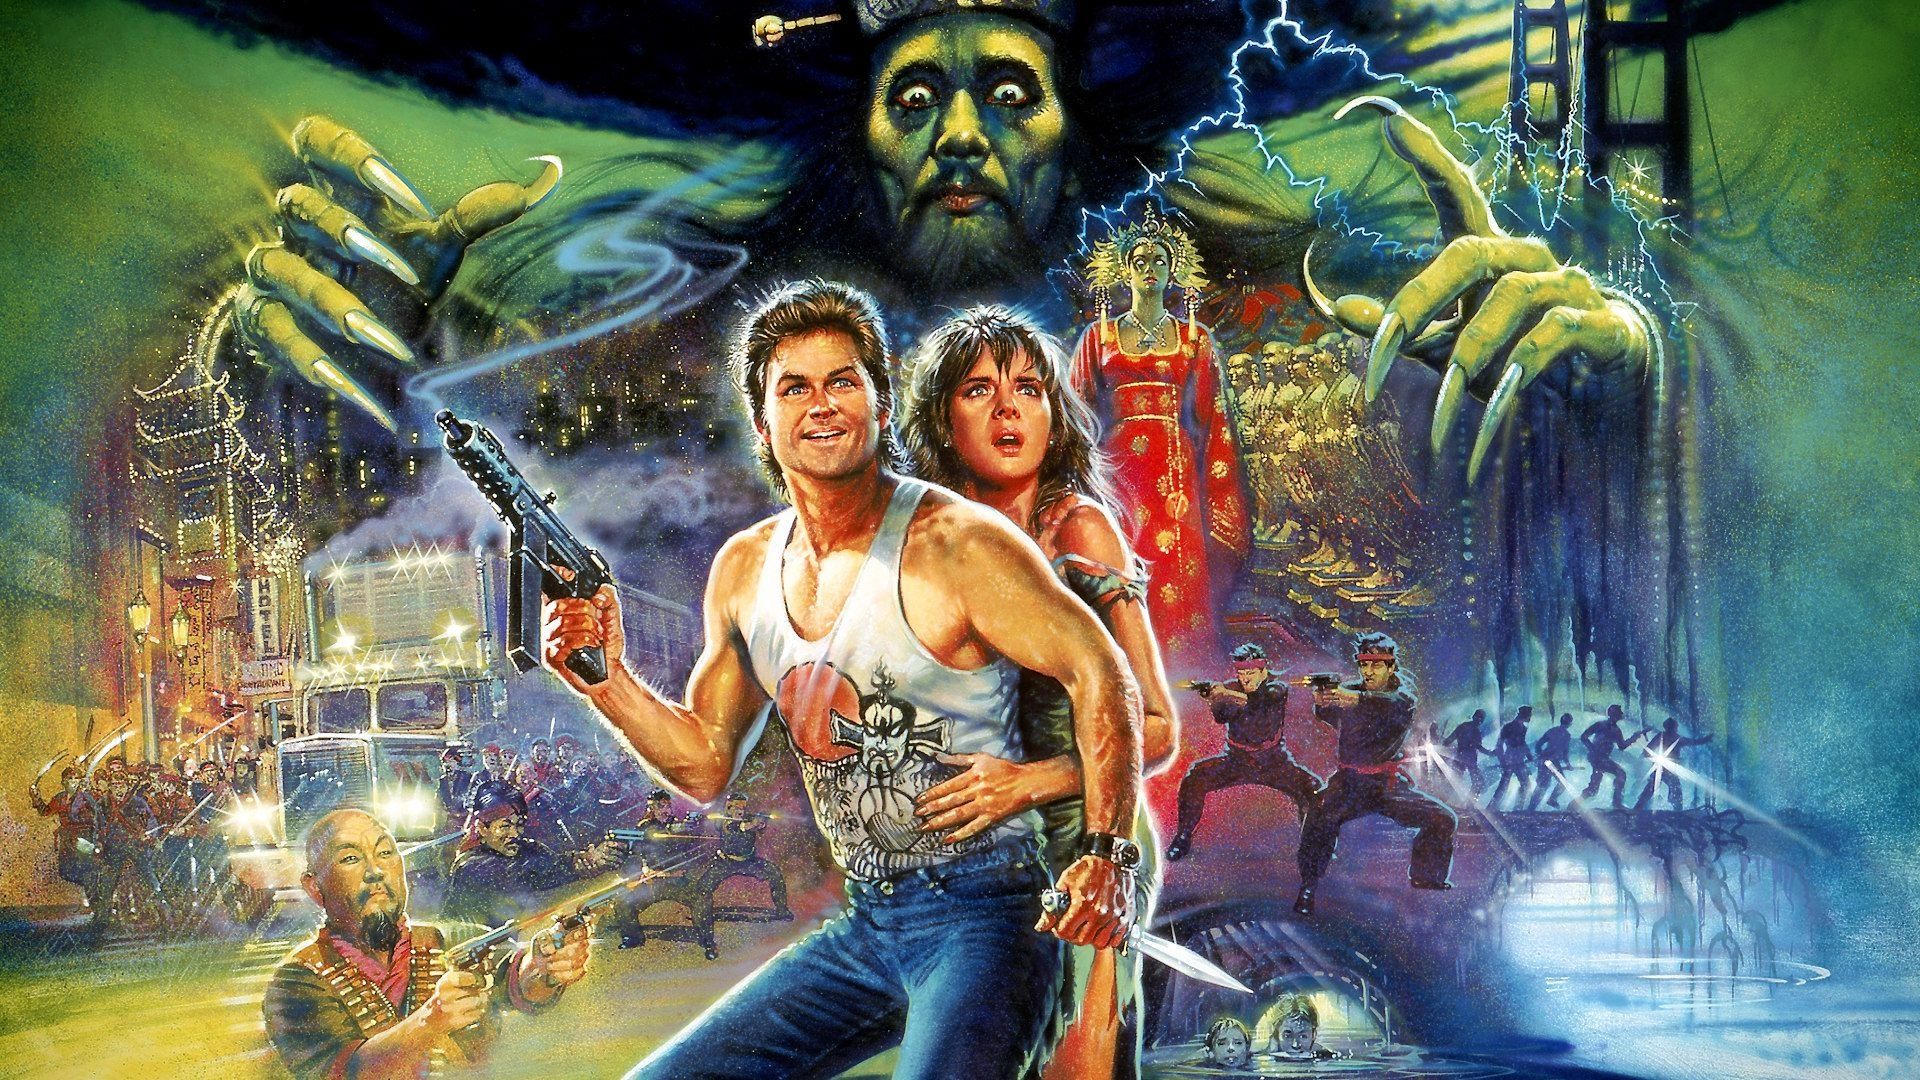 Big trouble in Little China